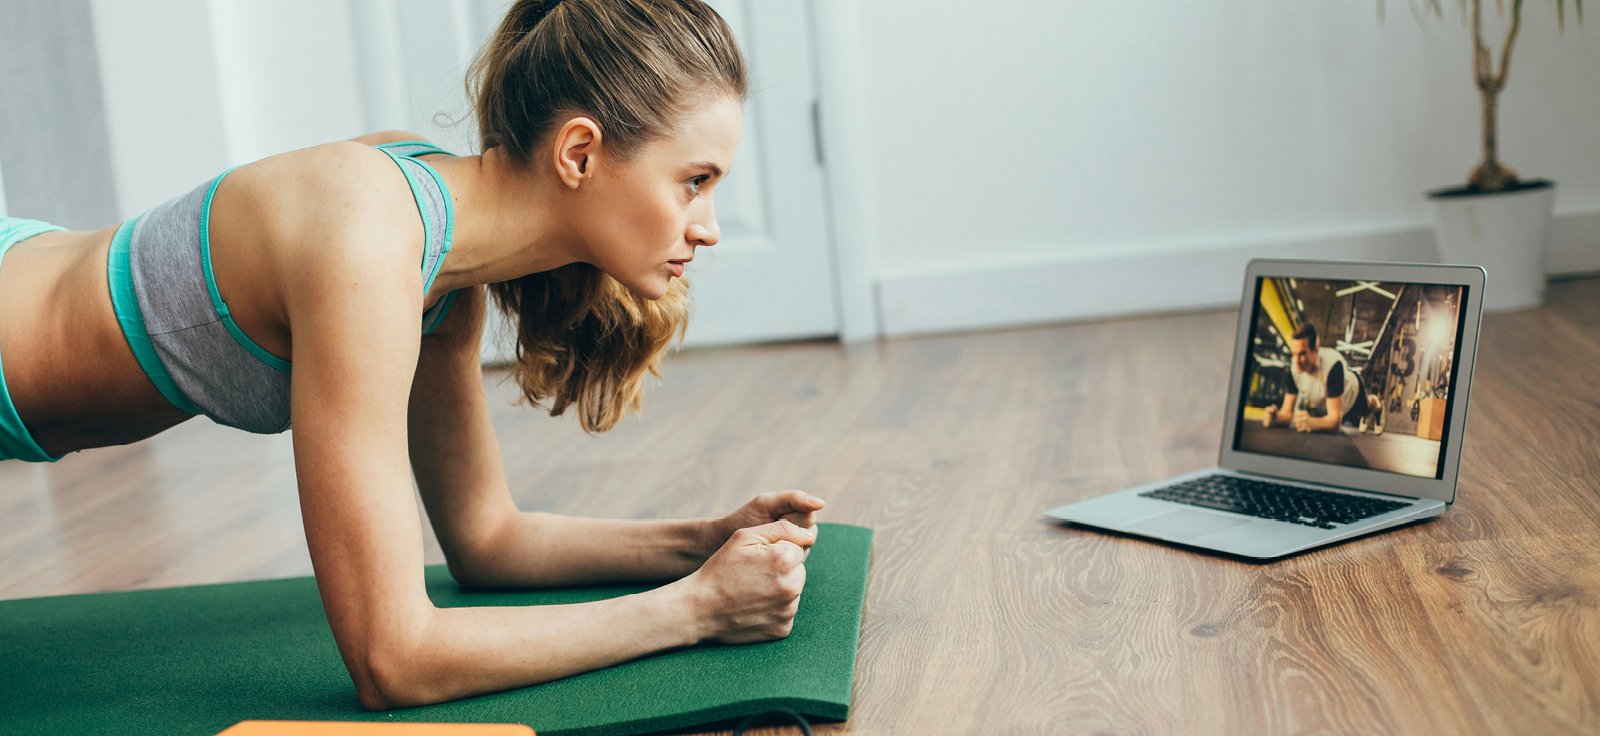 Choosing Between Free or Paid Workout Apps